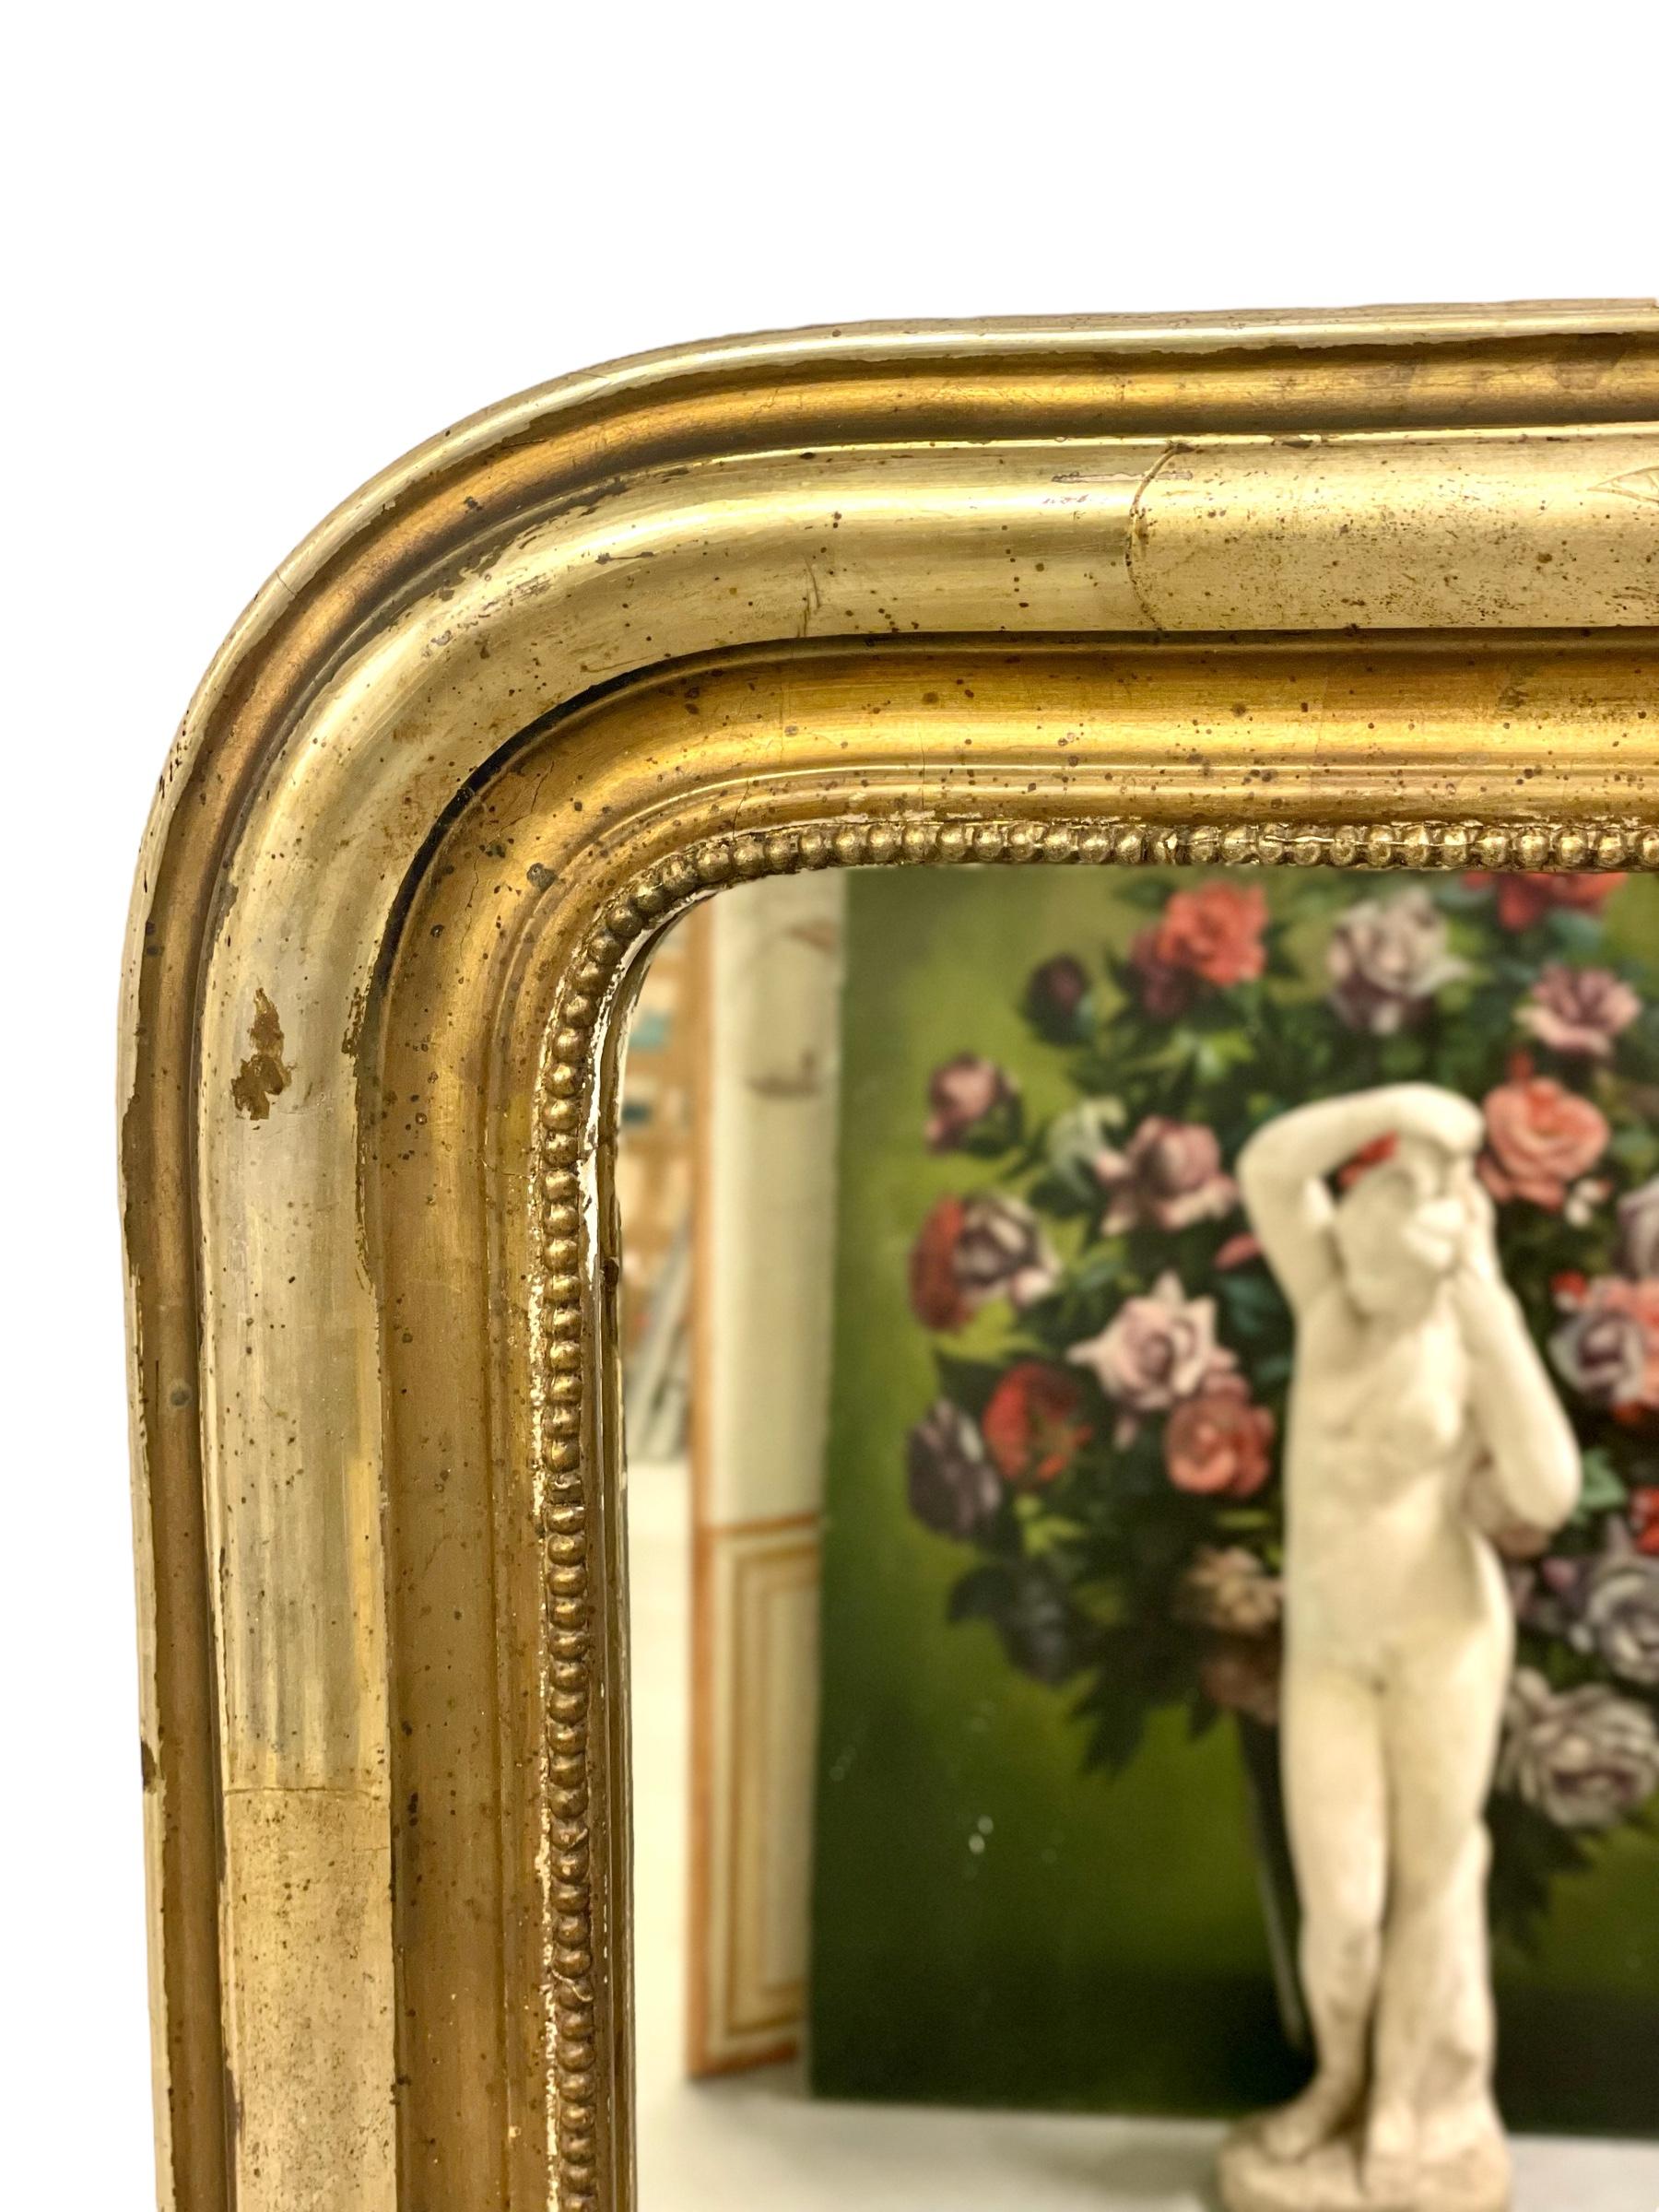 A gleaming Louis Philippe style gilt wood mirror, its burnished frame displaying the simple, clean lines and curved upper corners typical of the period. The original gilt finish of the carved and moulded outer frame is nicely worn, giving the mirror